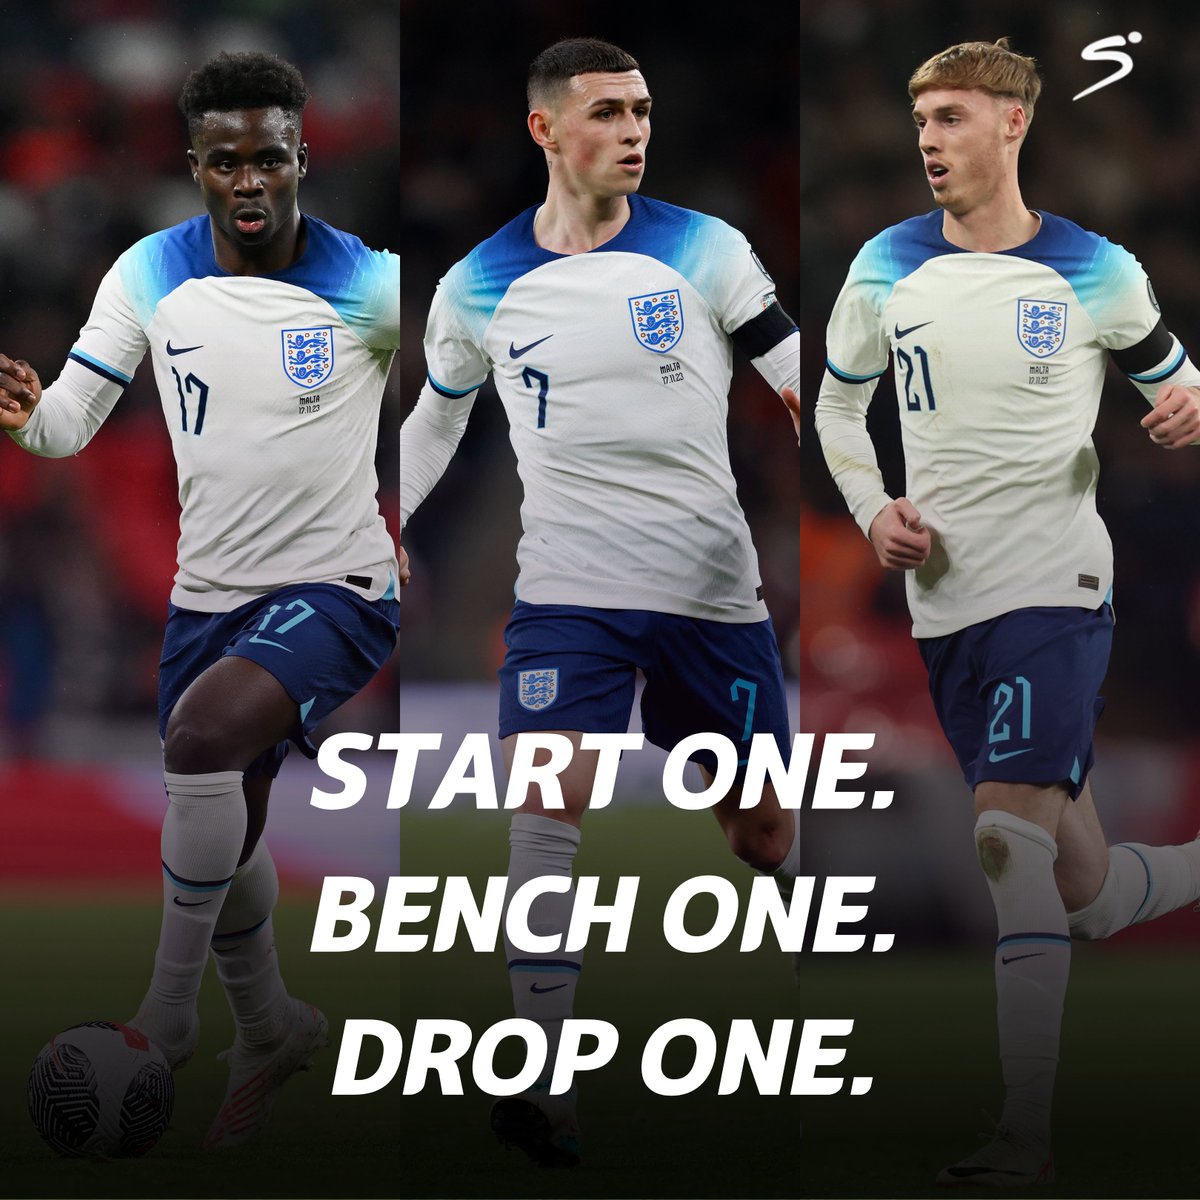 Start one, bench one, drop one. What would you do if you were Gareth Southgate?